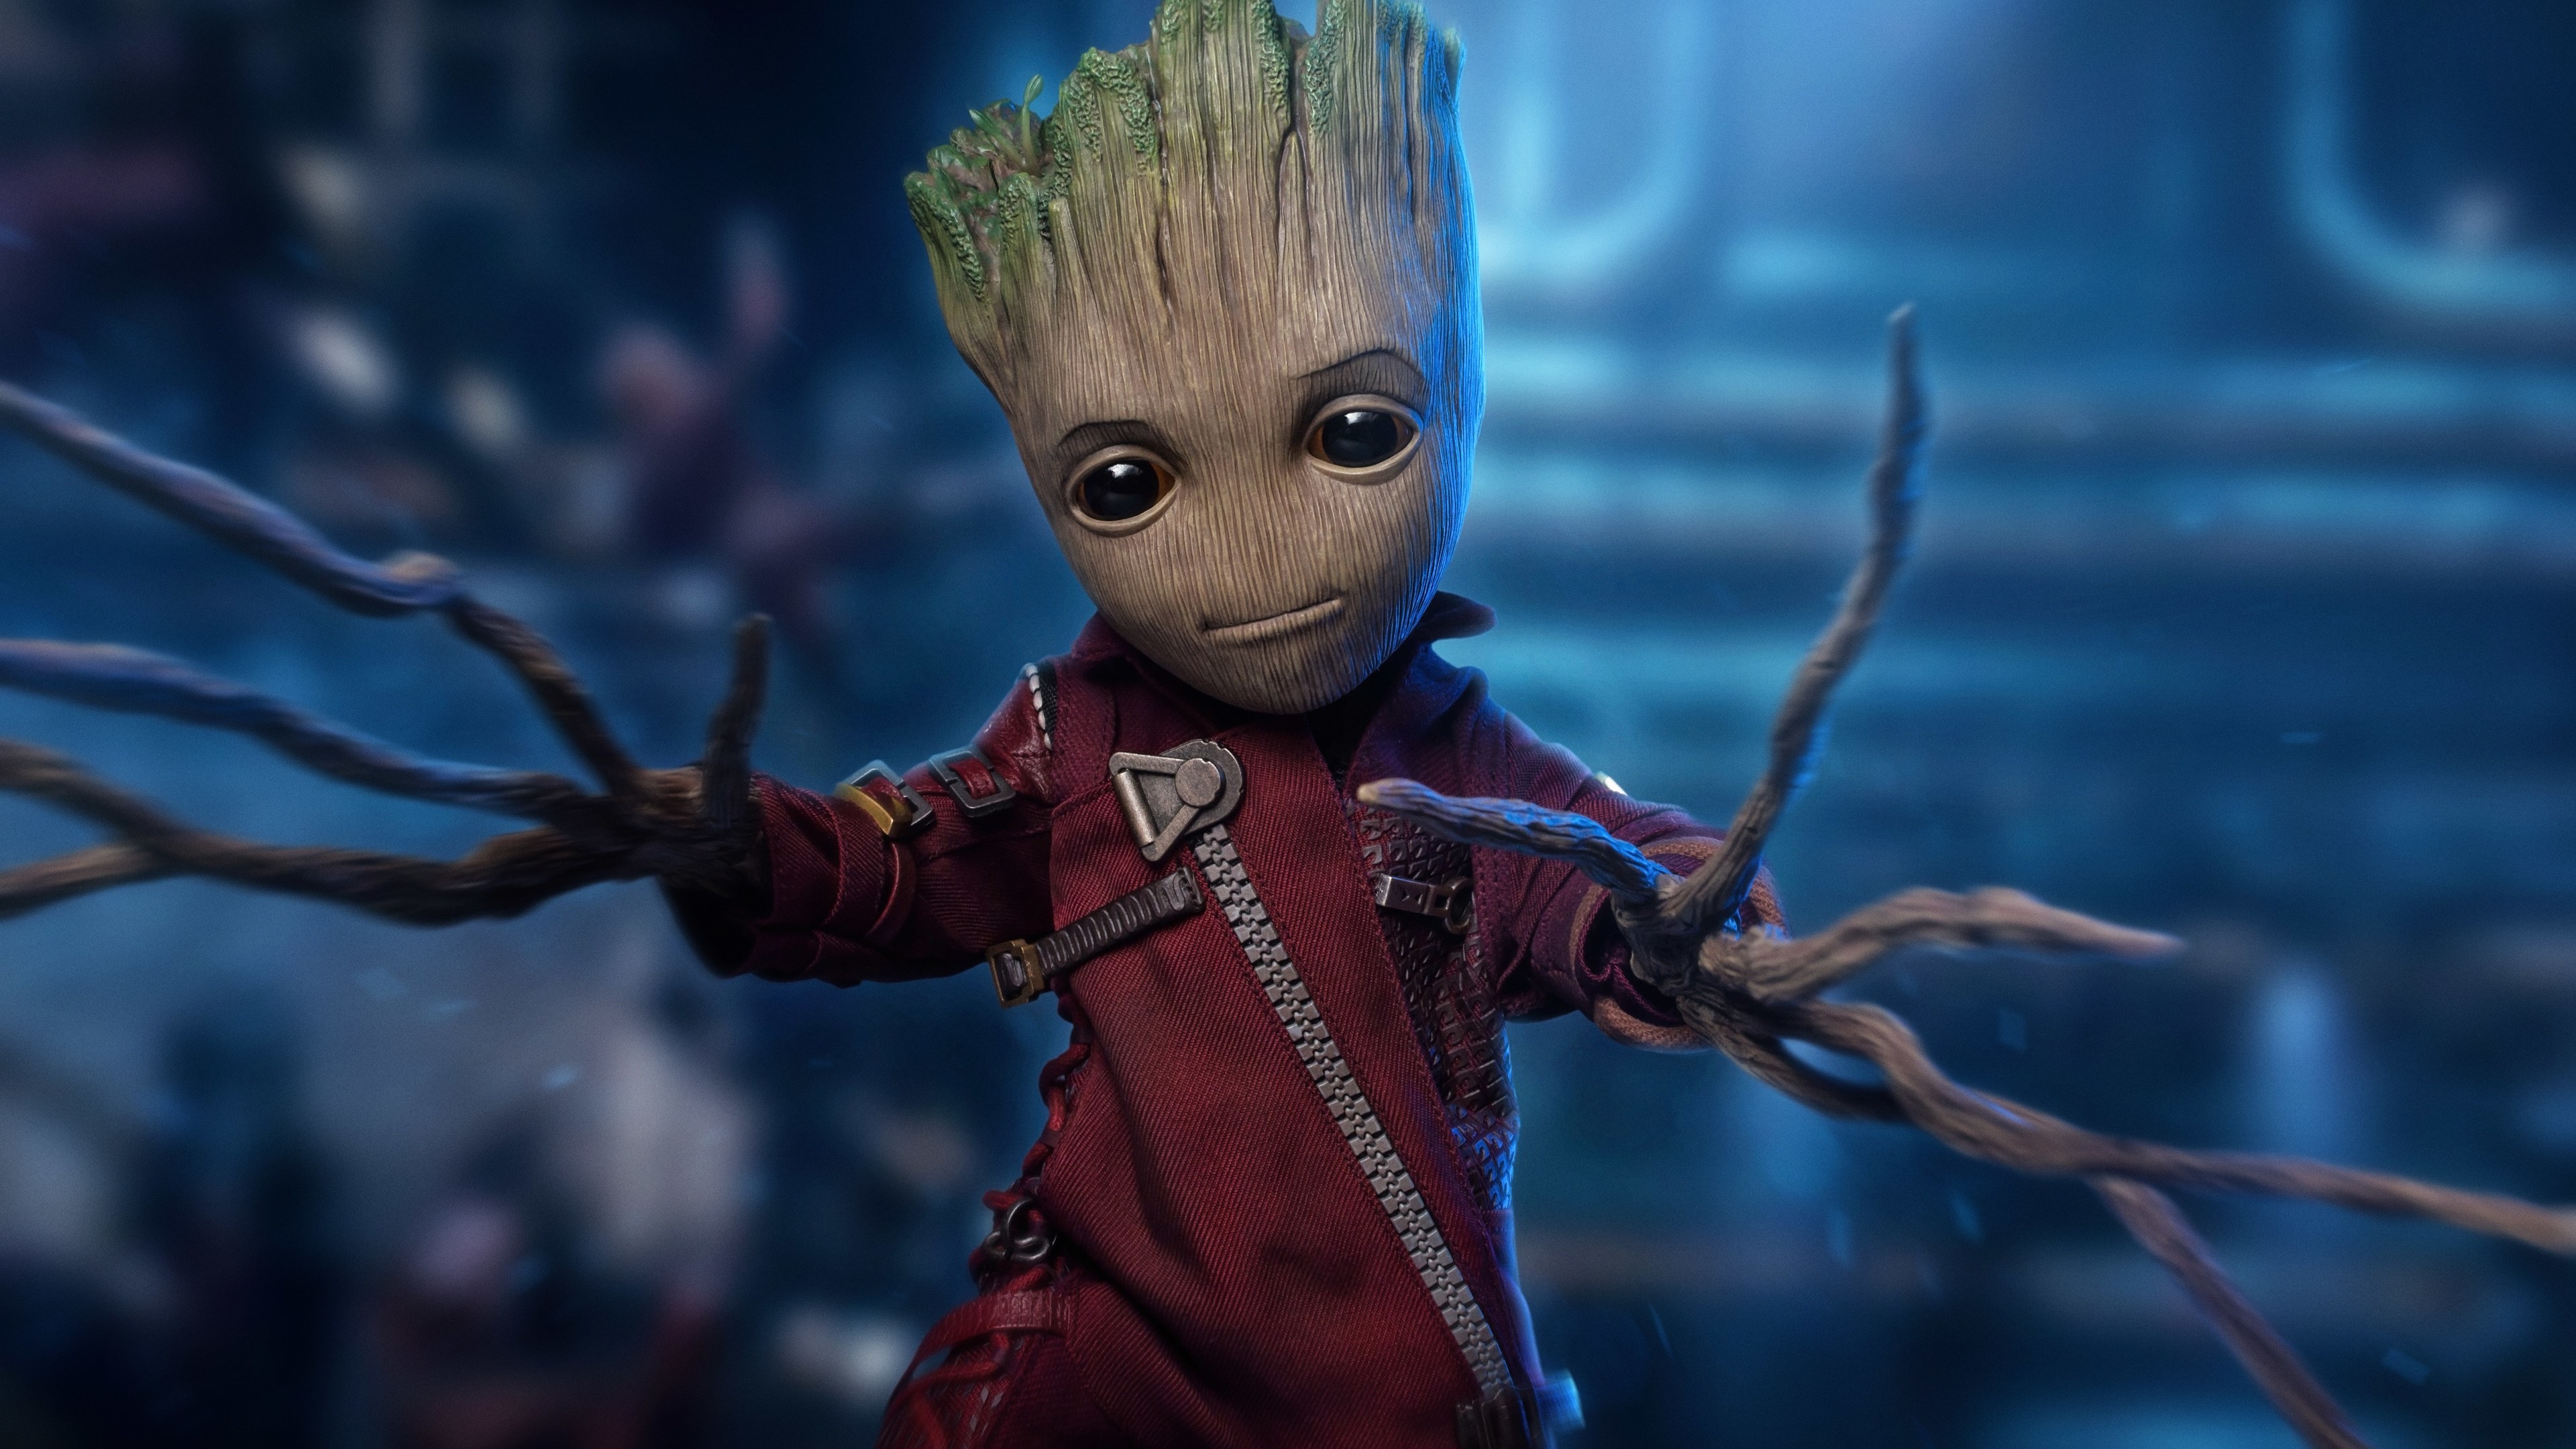 4k Baby Groot High Definition Wallpaper - Baby Groot Wallpaper 4k - HD Wallpaper 